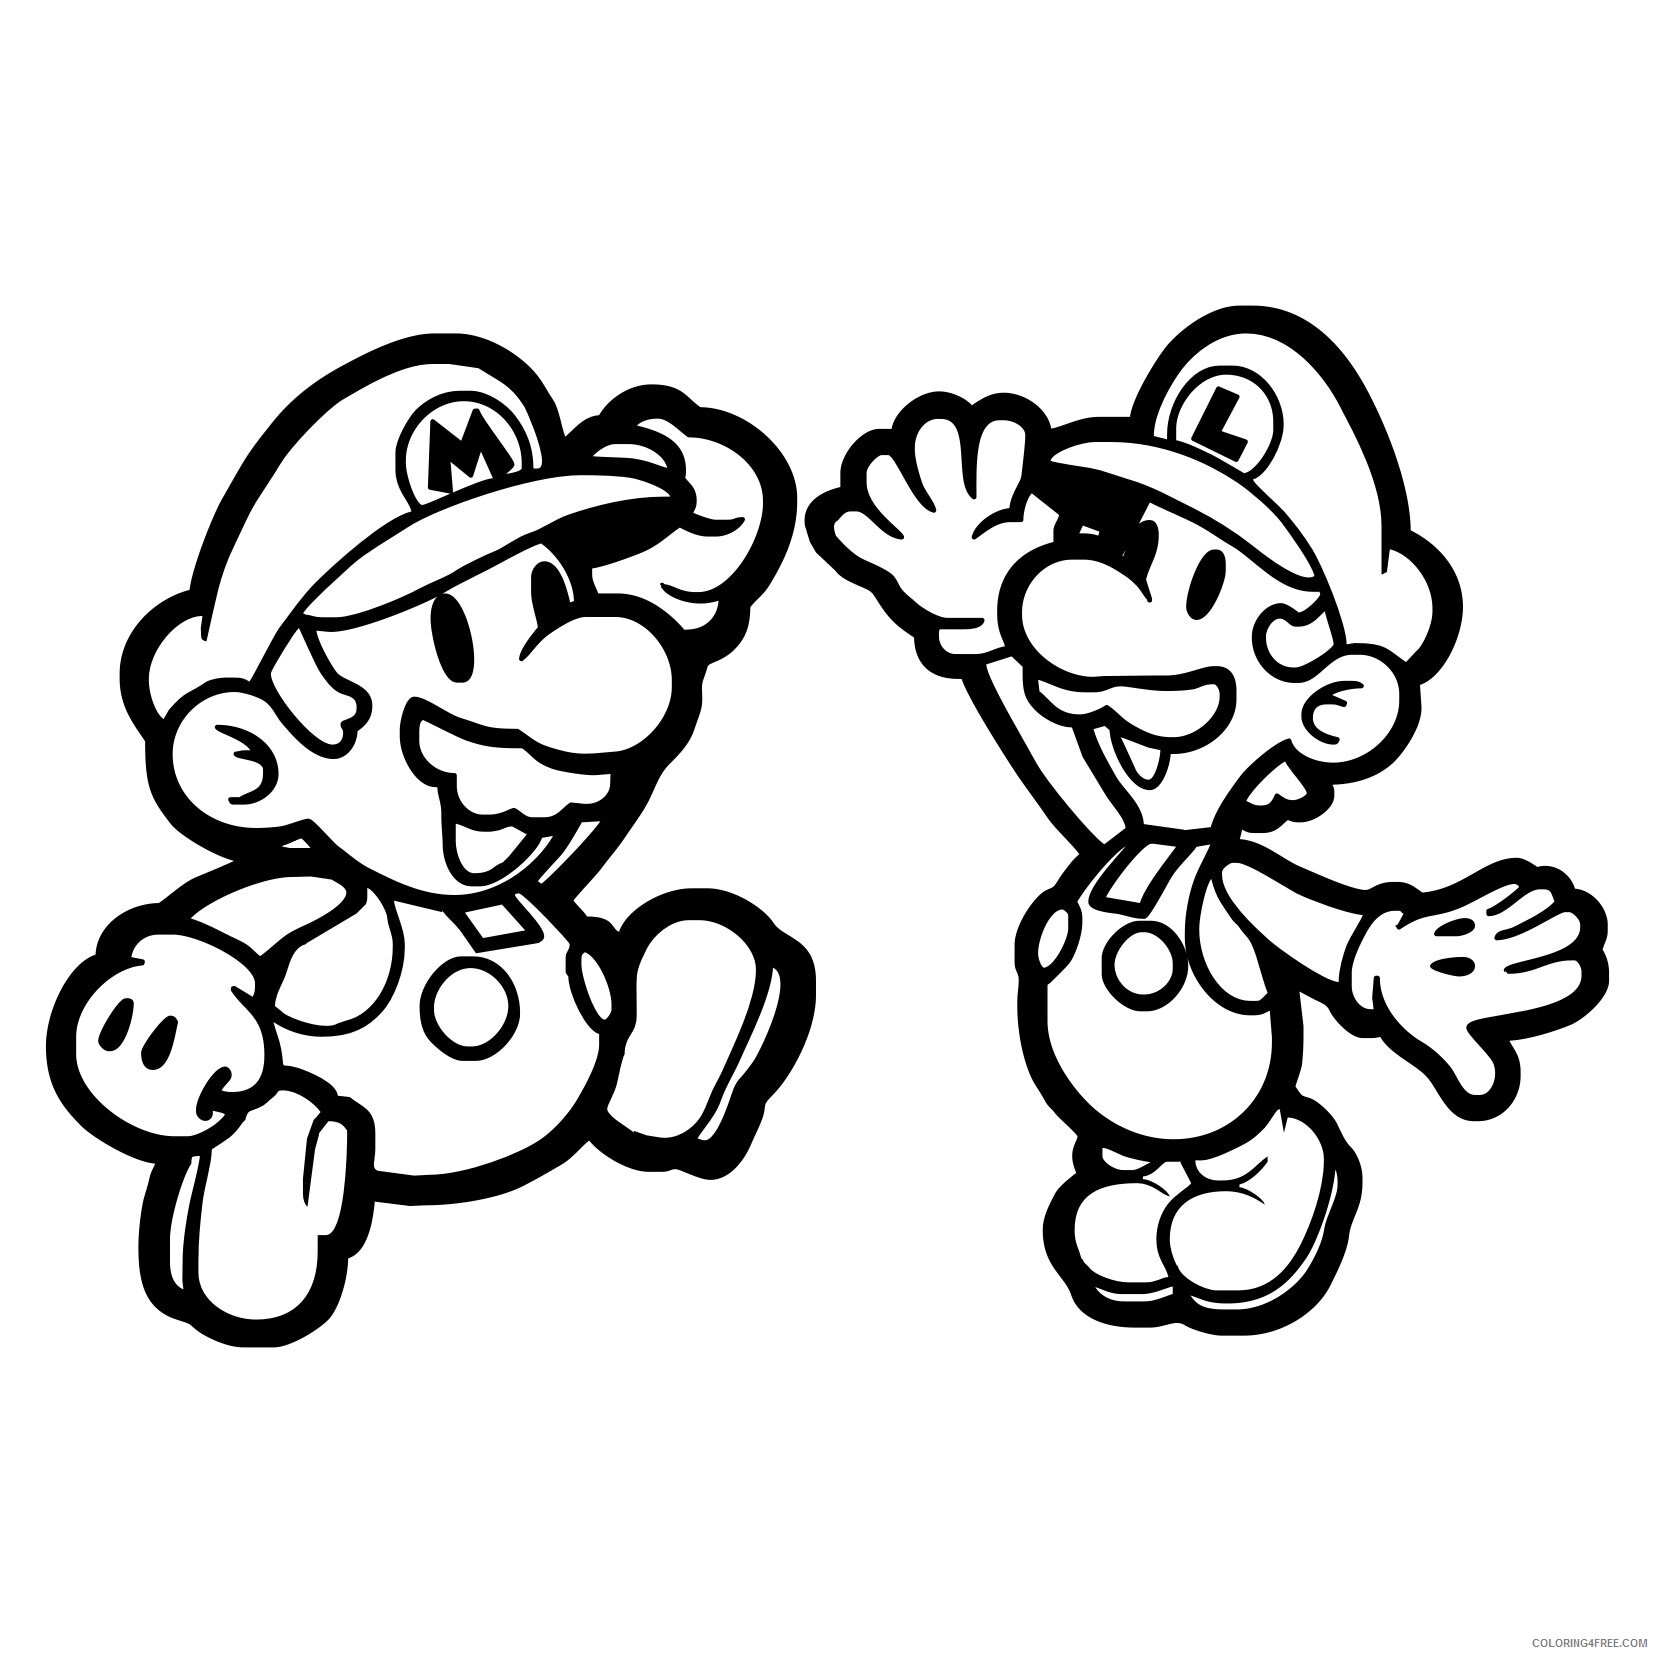 All Mario Character Coloring Pages Printable Sheets Mario Bros Page Coloring 2021 a 4161 Coloring4free